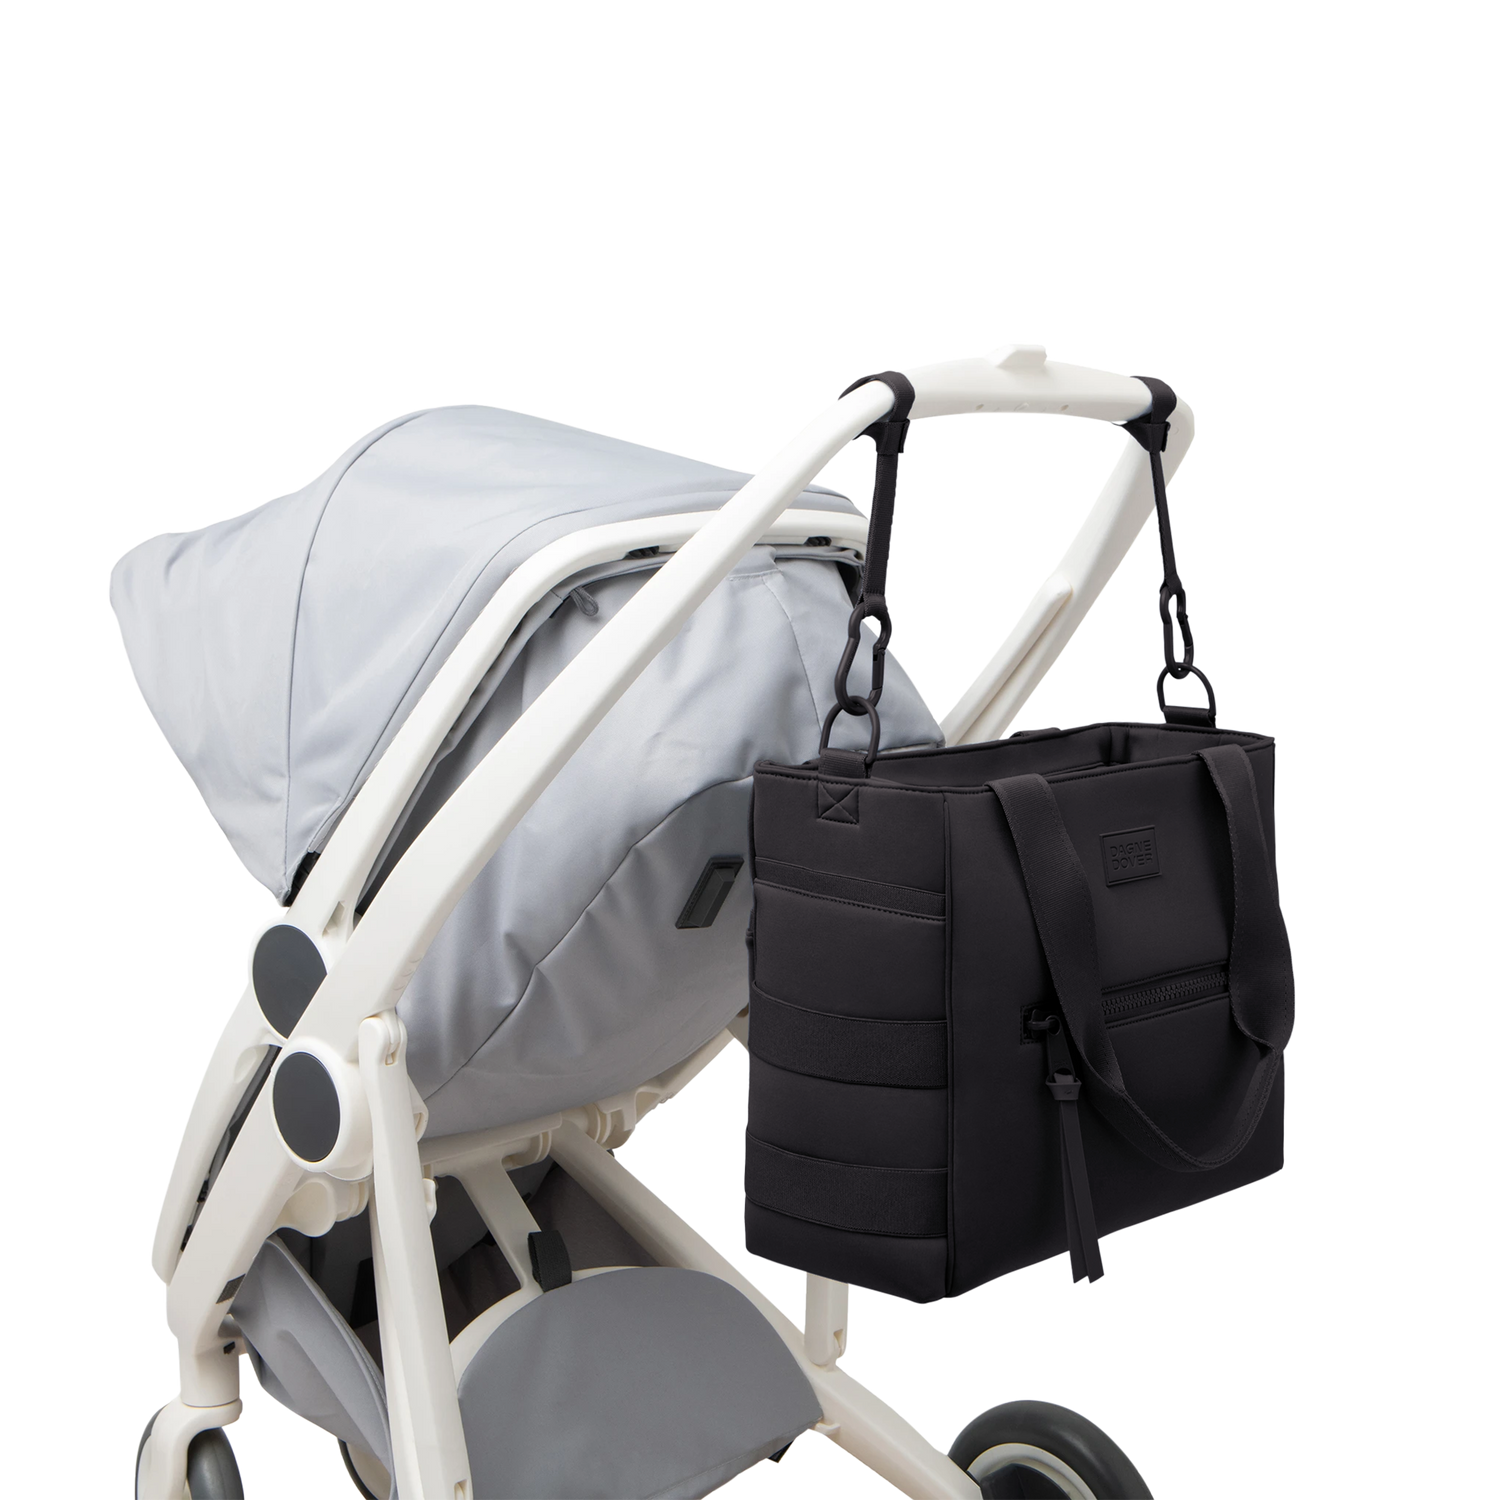 Dagne Dover Indi Diaper Backpack Large Heather Grey + Reviews